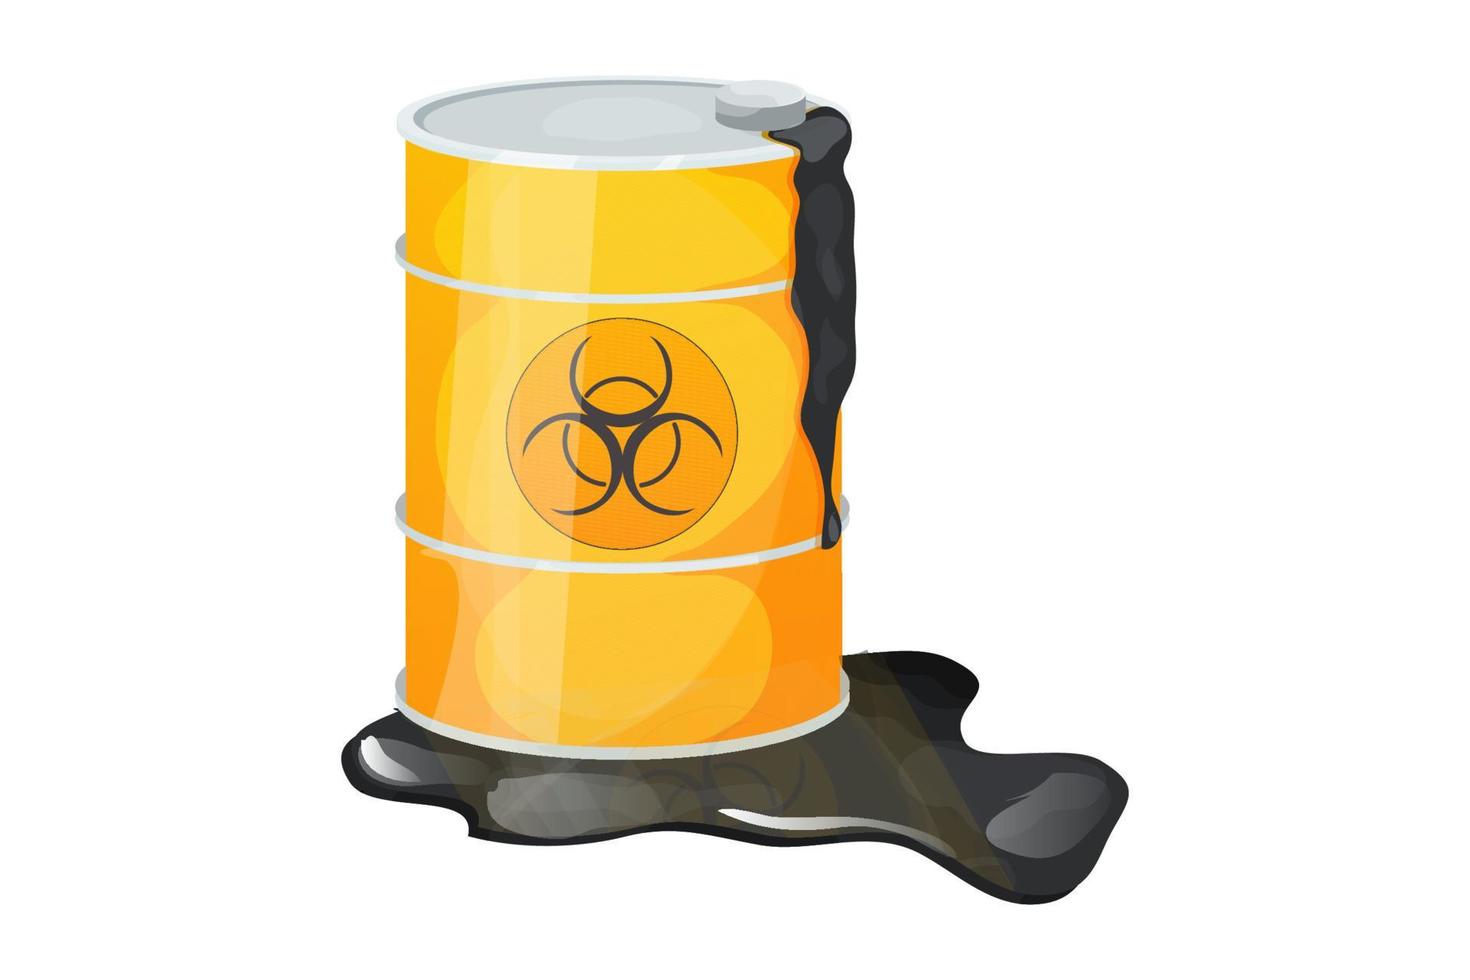 Metal barrel toxic, dangerous sign with liquid around, waste, pollution in cartoon style isolated on white background. Radioactive, flammable material. Vector illustration